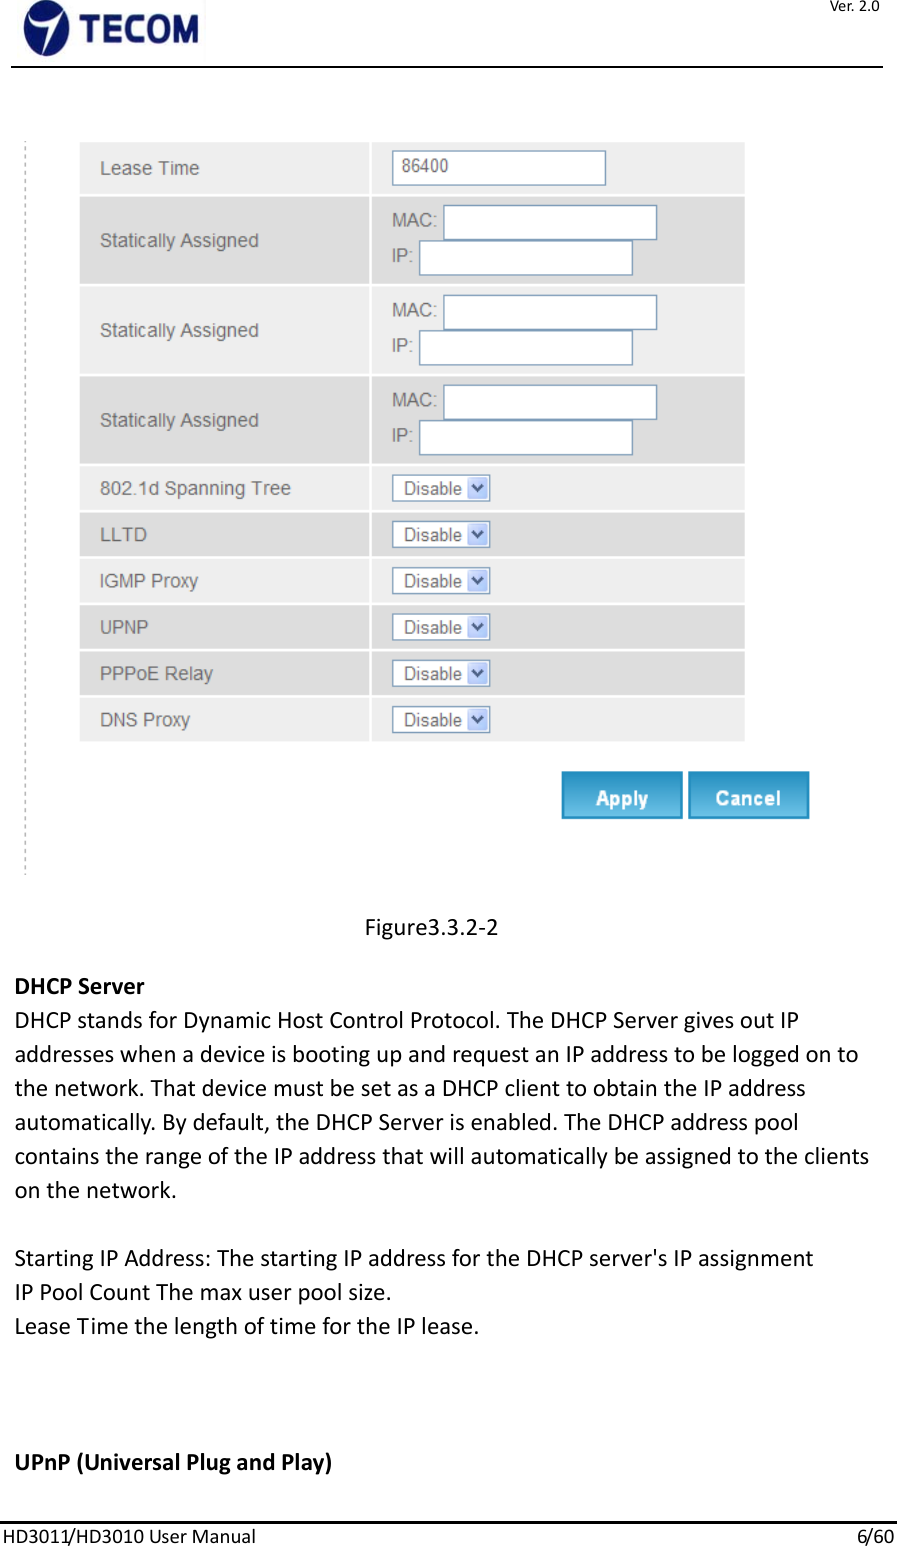 Ver.2.0HD3011/HD3010UserManual6/ 6 0Figure3.3.2‐2DHCPServerDHCPstandsforDynamicHostControlProtocol.TheDHCPServergivesoutIPaddresseswhenadeviceisbootingupandrequestanIPaddresstobeloggedontothenetwork.ThatdevicemustbesetasaDHCPclienttoobtaintheIPaddressautomatically.Bydefault,theDHCPServerisenabled.TheDHCPaddresspoolcontainstherangeoftheIPaddressthatwillautomaticallybeassignedtotheclientsonthenetwork.StartingIPAddress:ThestartingIPaddressfortheDHCPserver&apos;sIPassignmentIPPoolCountThemaxuserpoolsize.LeaseTimethelengthoftimefortheIPlease.UPnP(UniversalPlugandPlay)